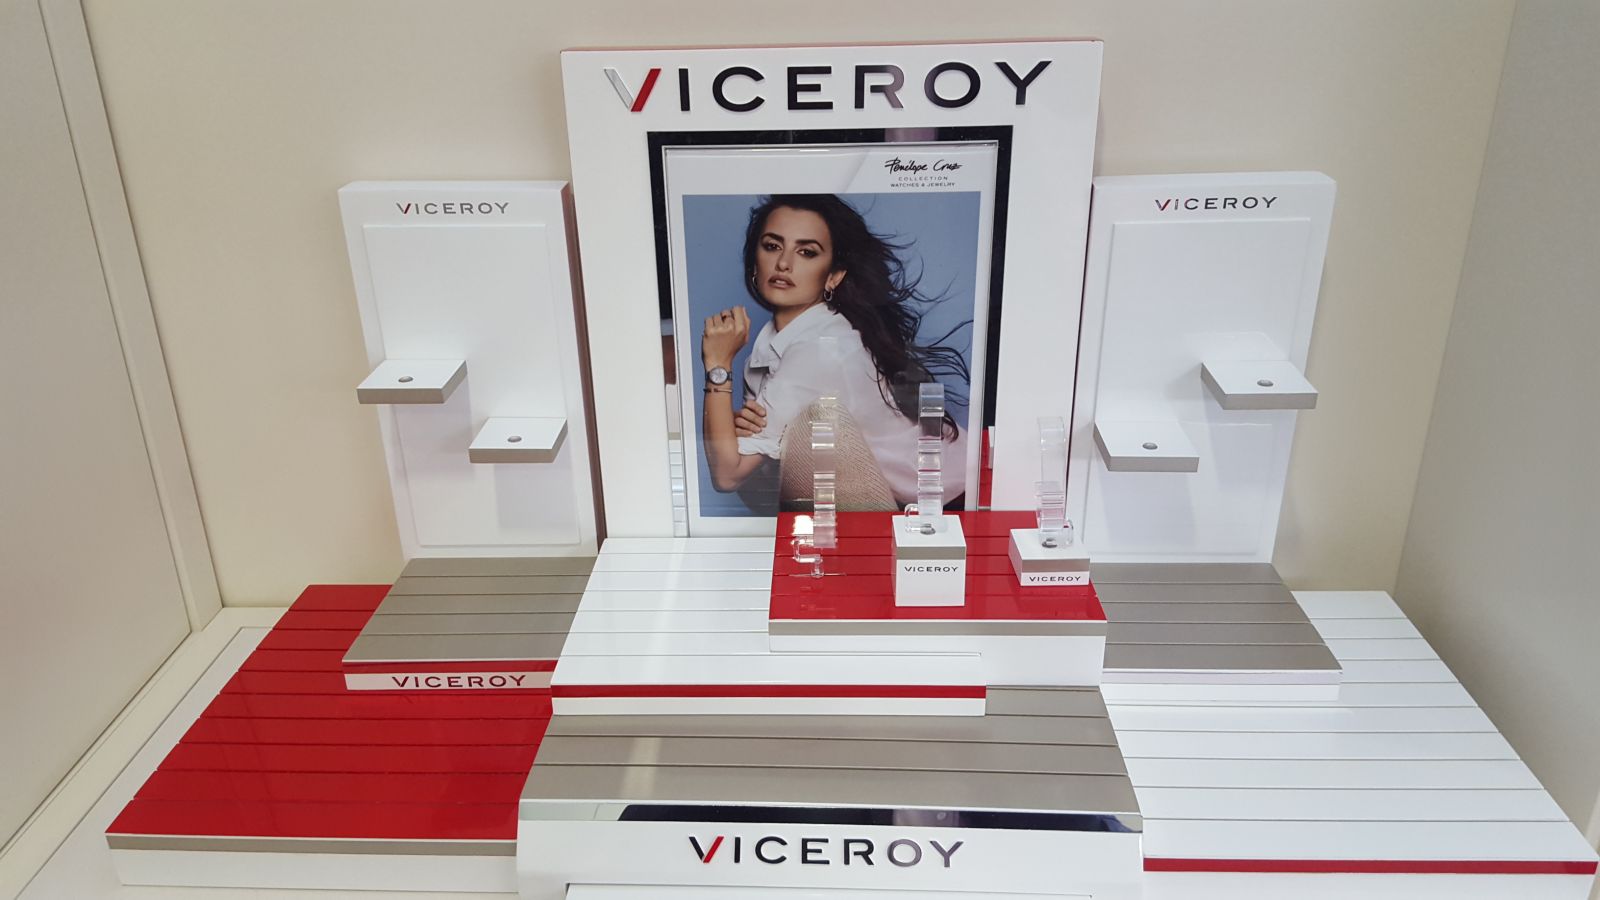 VICEROY WATCHES DISPLAY